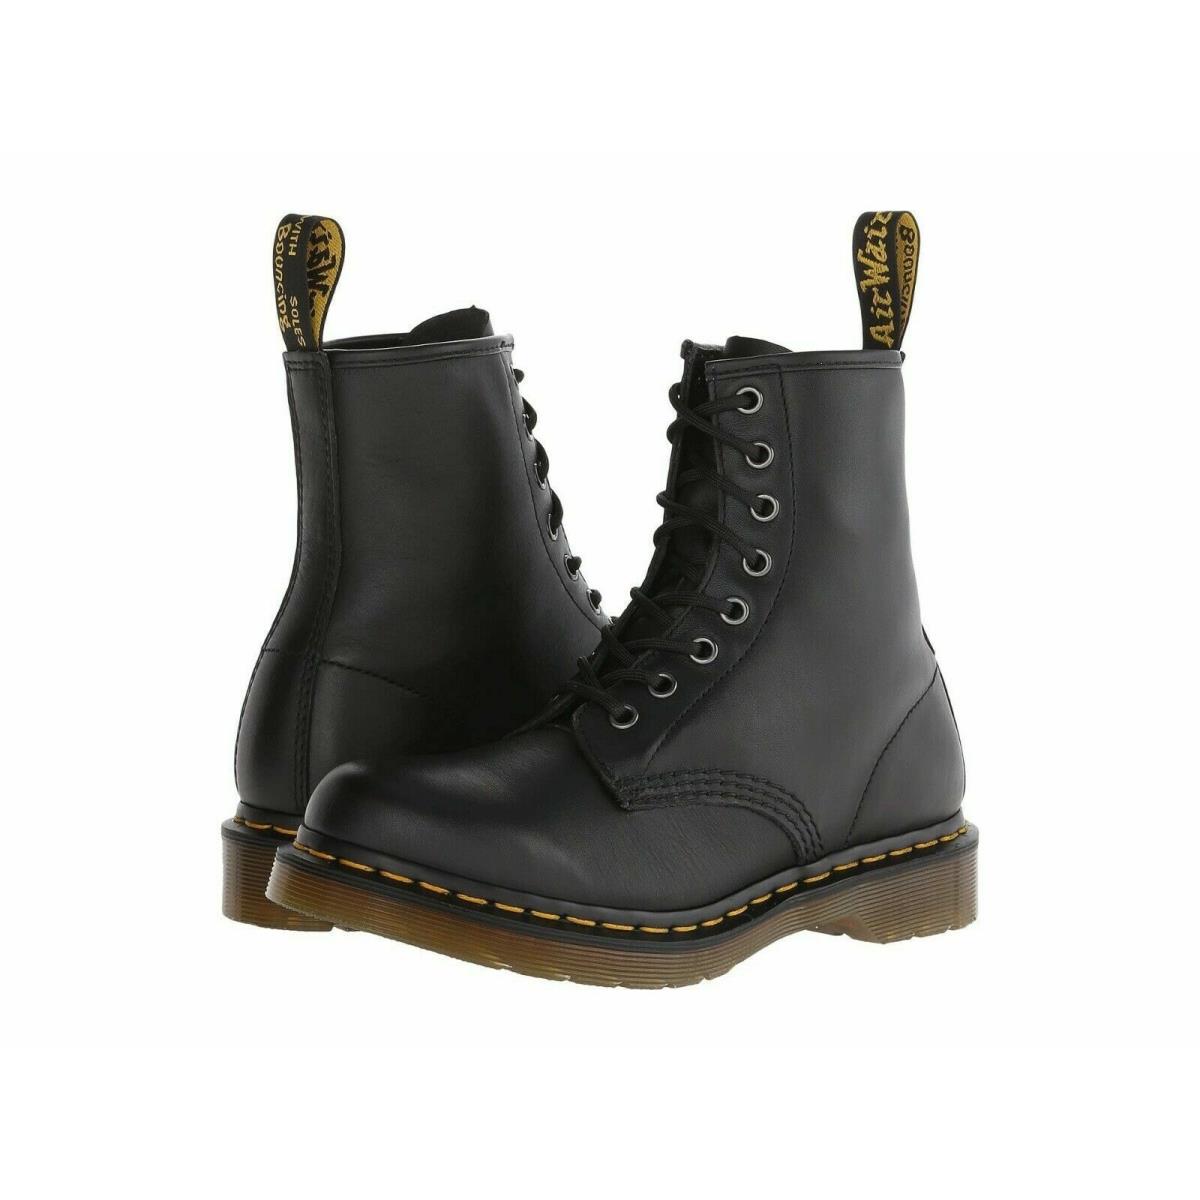 Women`s Shoes Dr. Martens 1460 8 Eye Leather Boots 11821002 Black Nappa Size 7